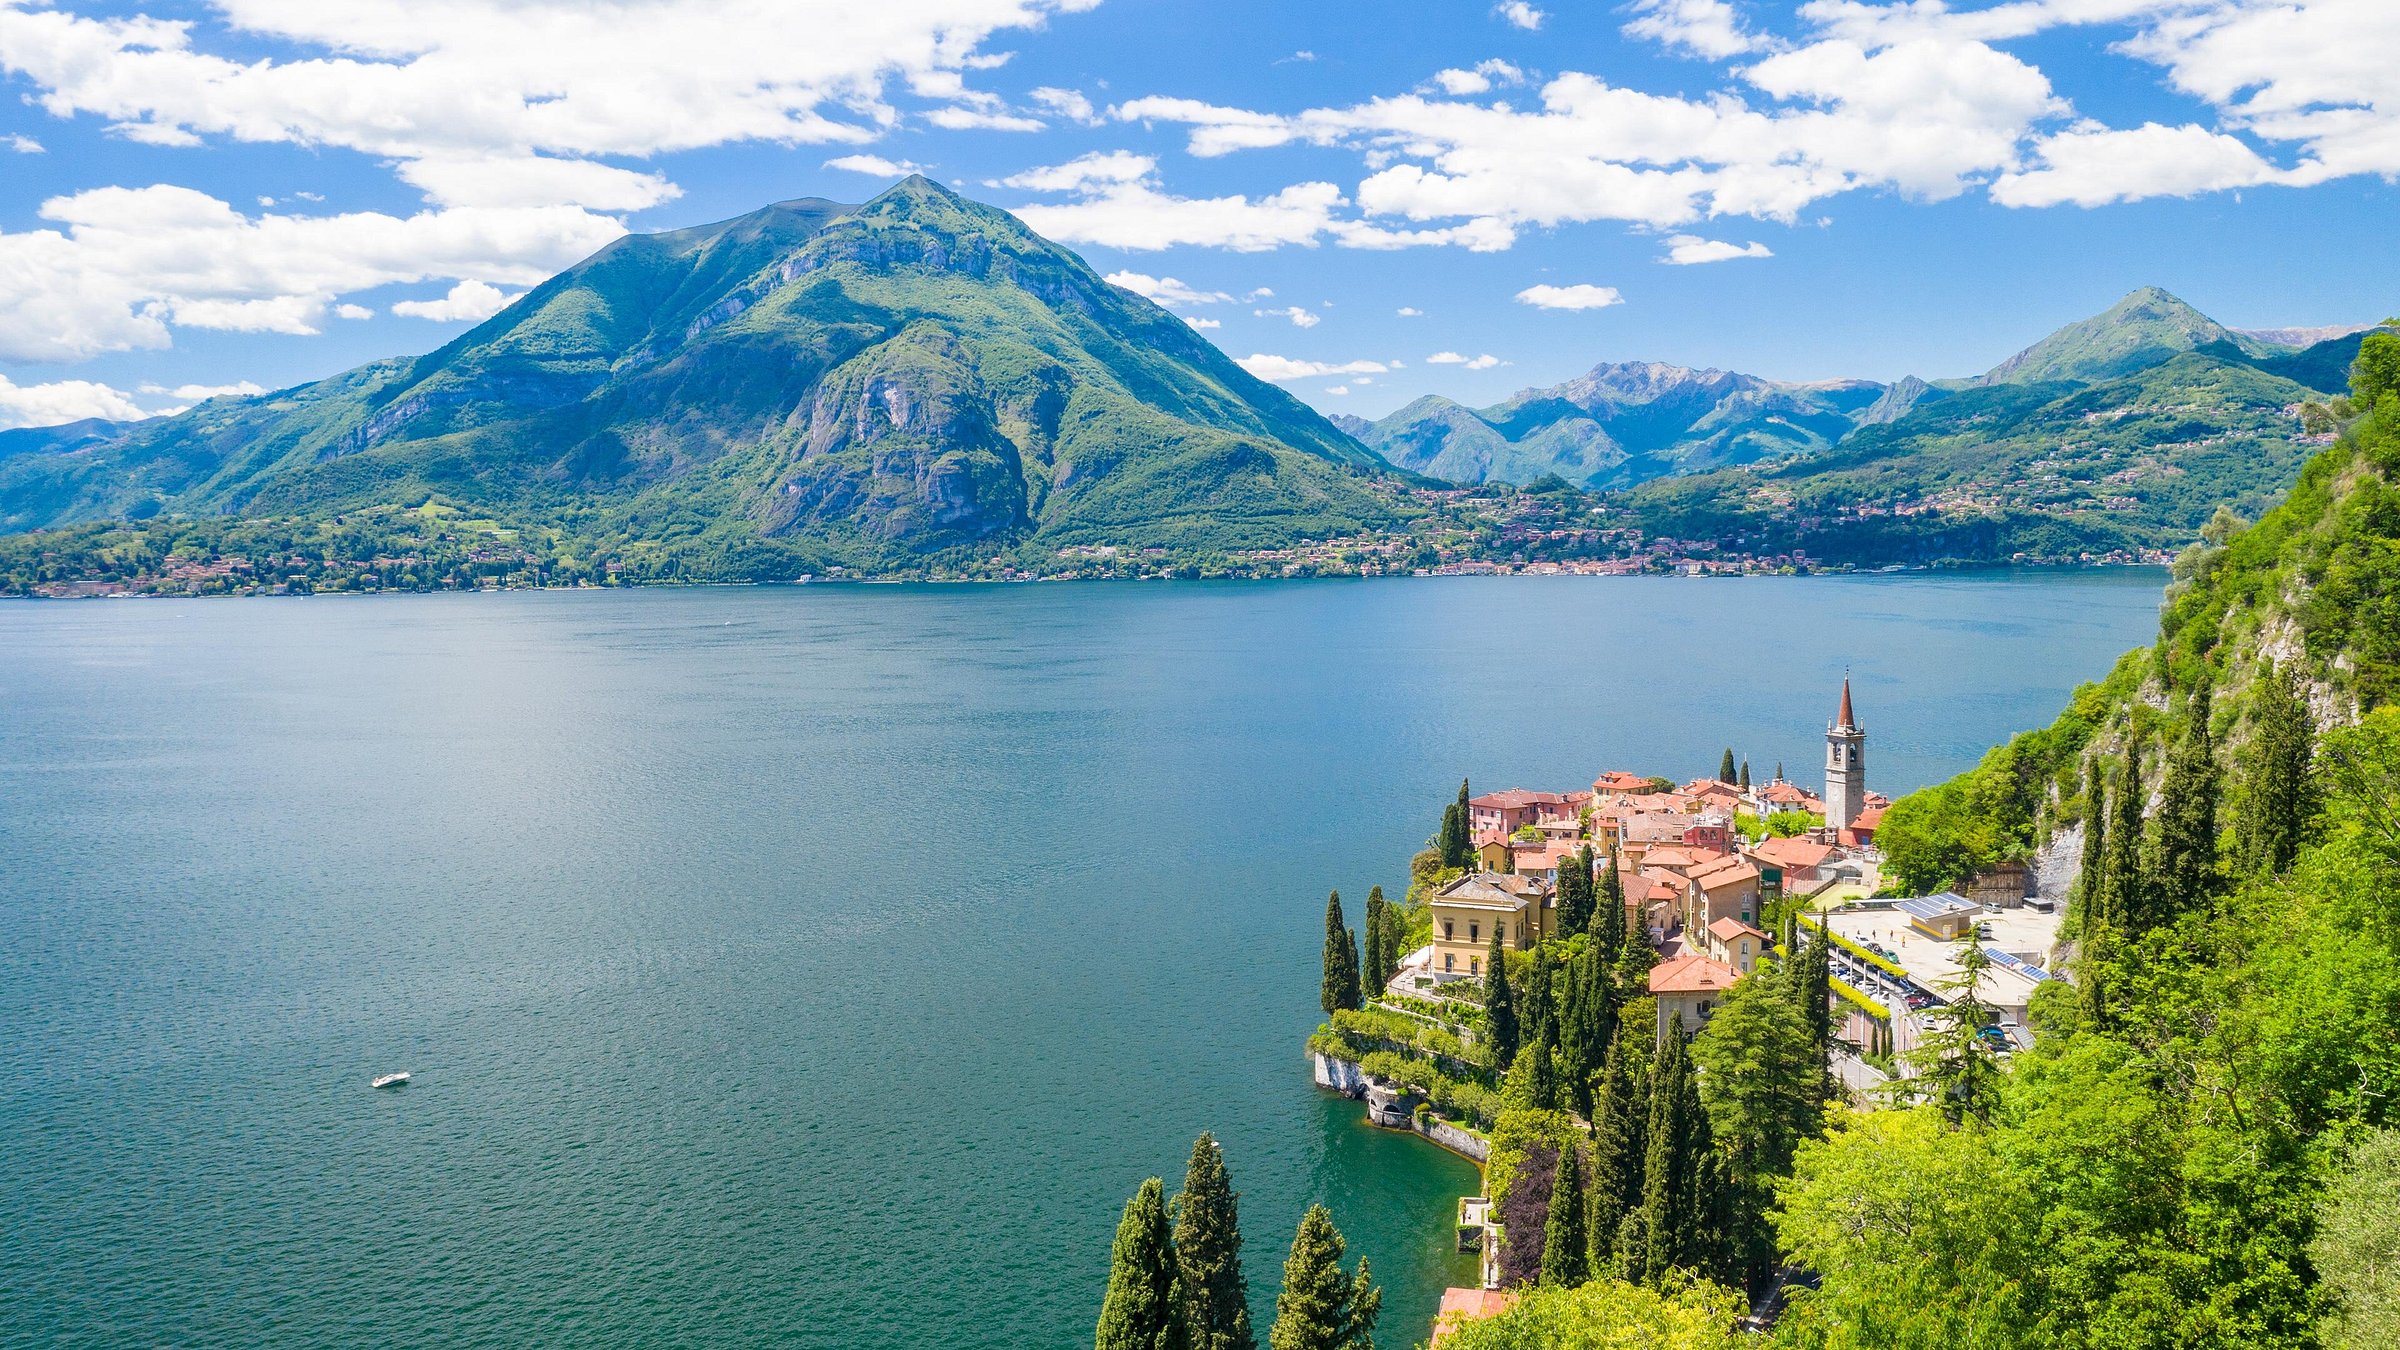 7 best lakes in Europe for a summer escape - Tripadvisor